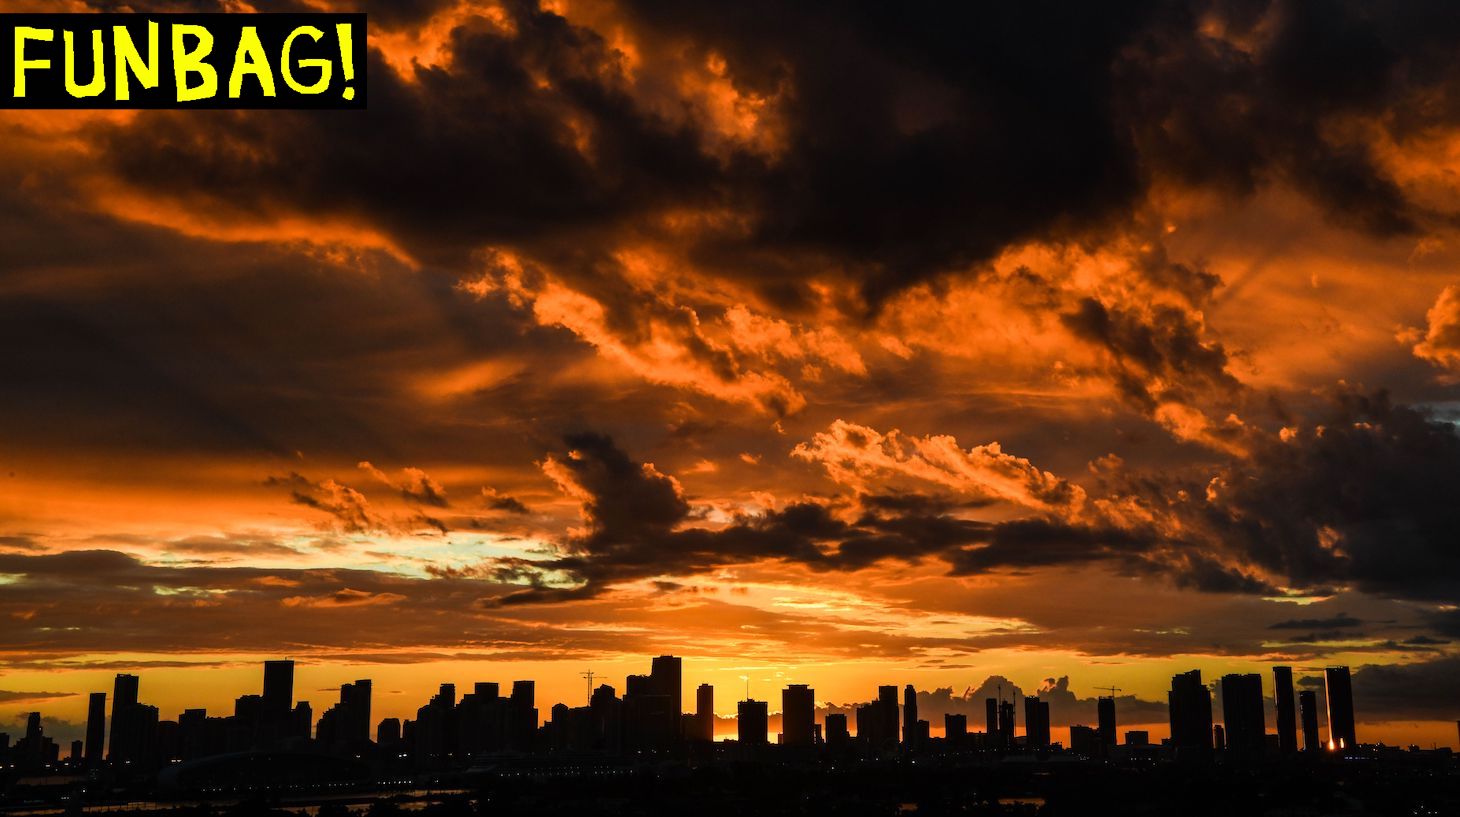 TOPSHOT - The Miami skyline is seen as the sun sets in the background in South Bay, Miami Beach, on February 24, 2021. (Photo by CHANDAN KHANNA / AFP) (Photo by CHANDAN KHANNA/AFP via Getty Images)